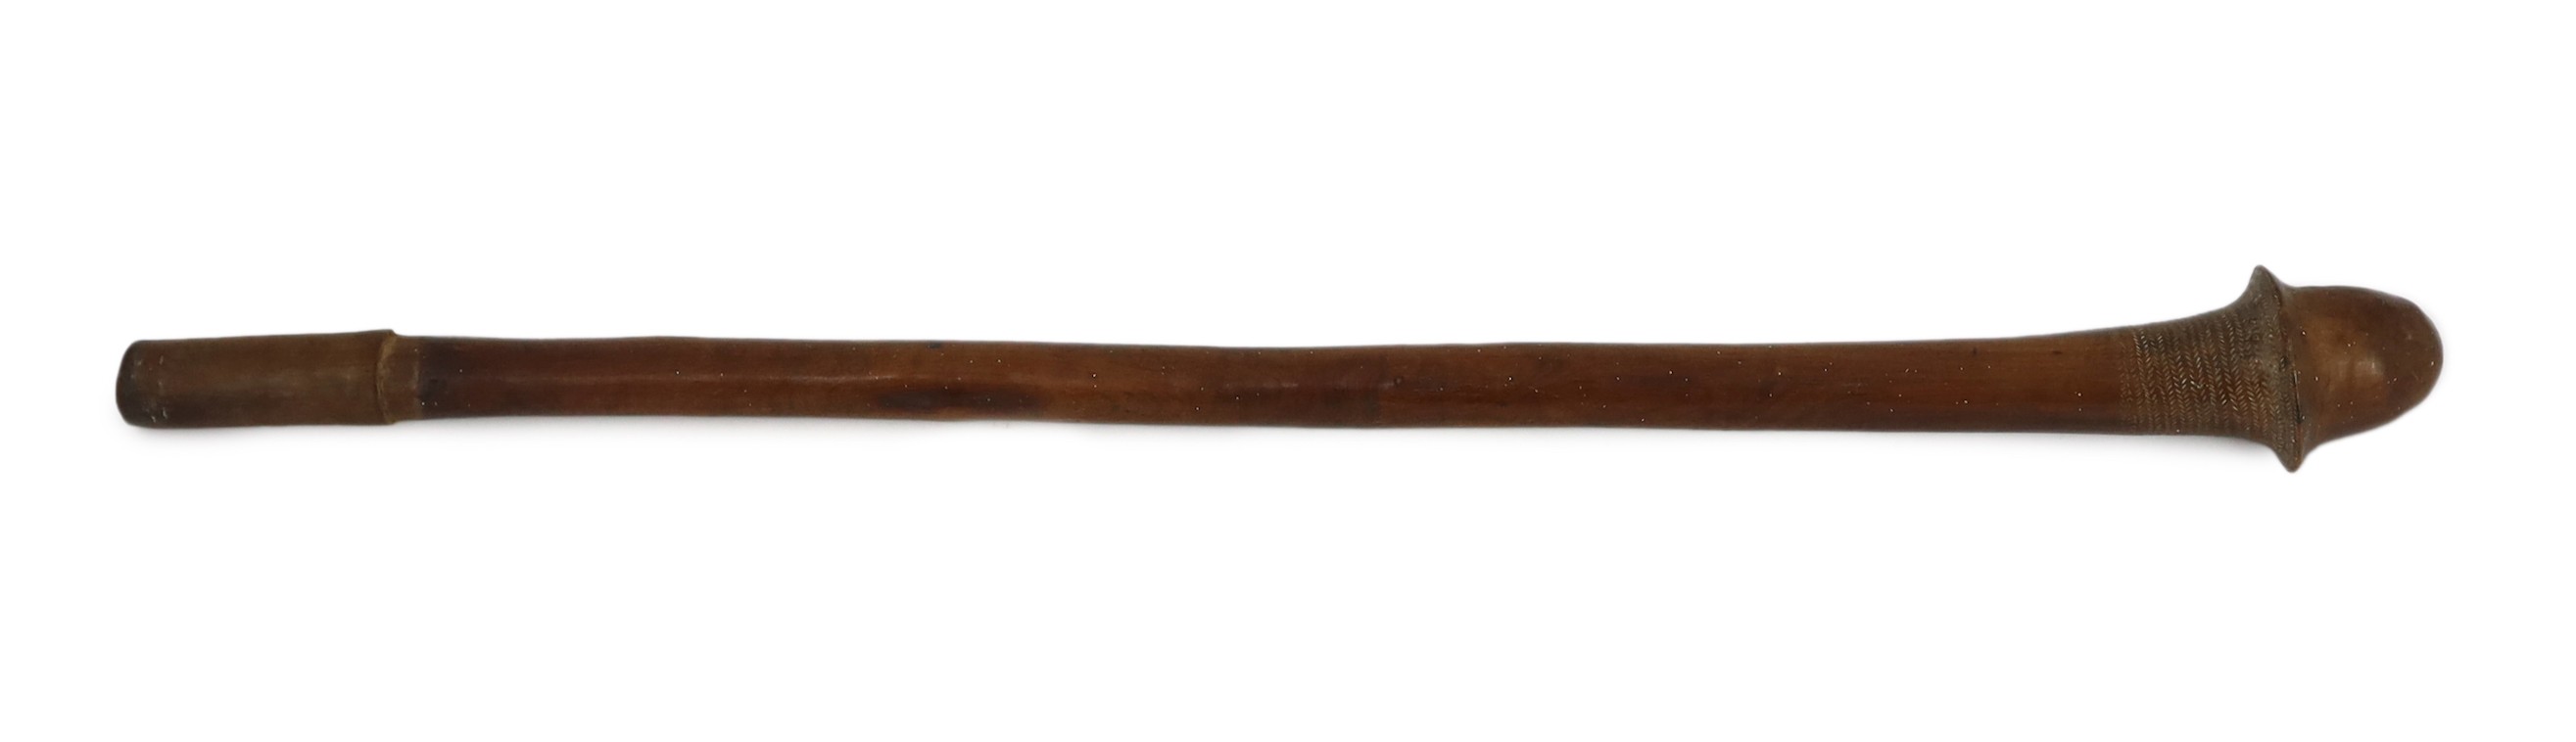 A South Sea Island hardwood war club, with chevron banded engraving beneath the head and